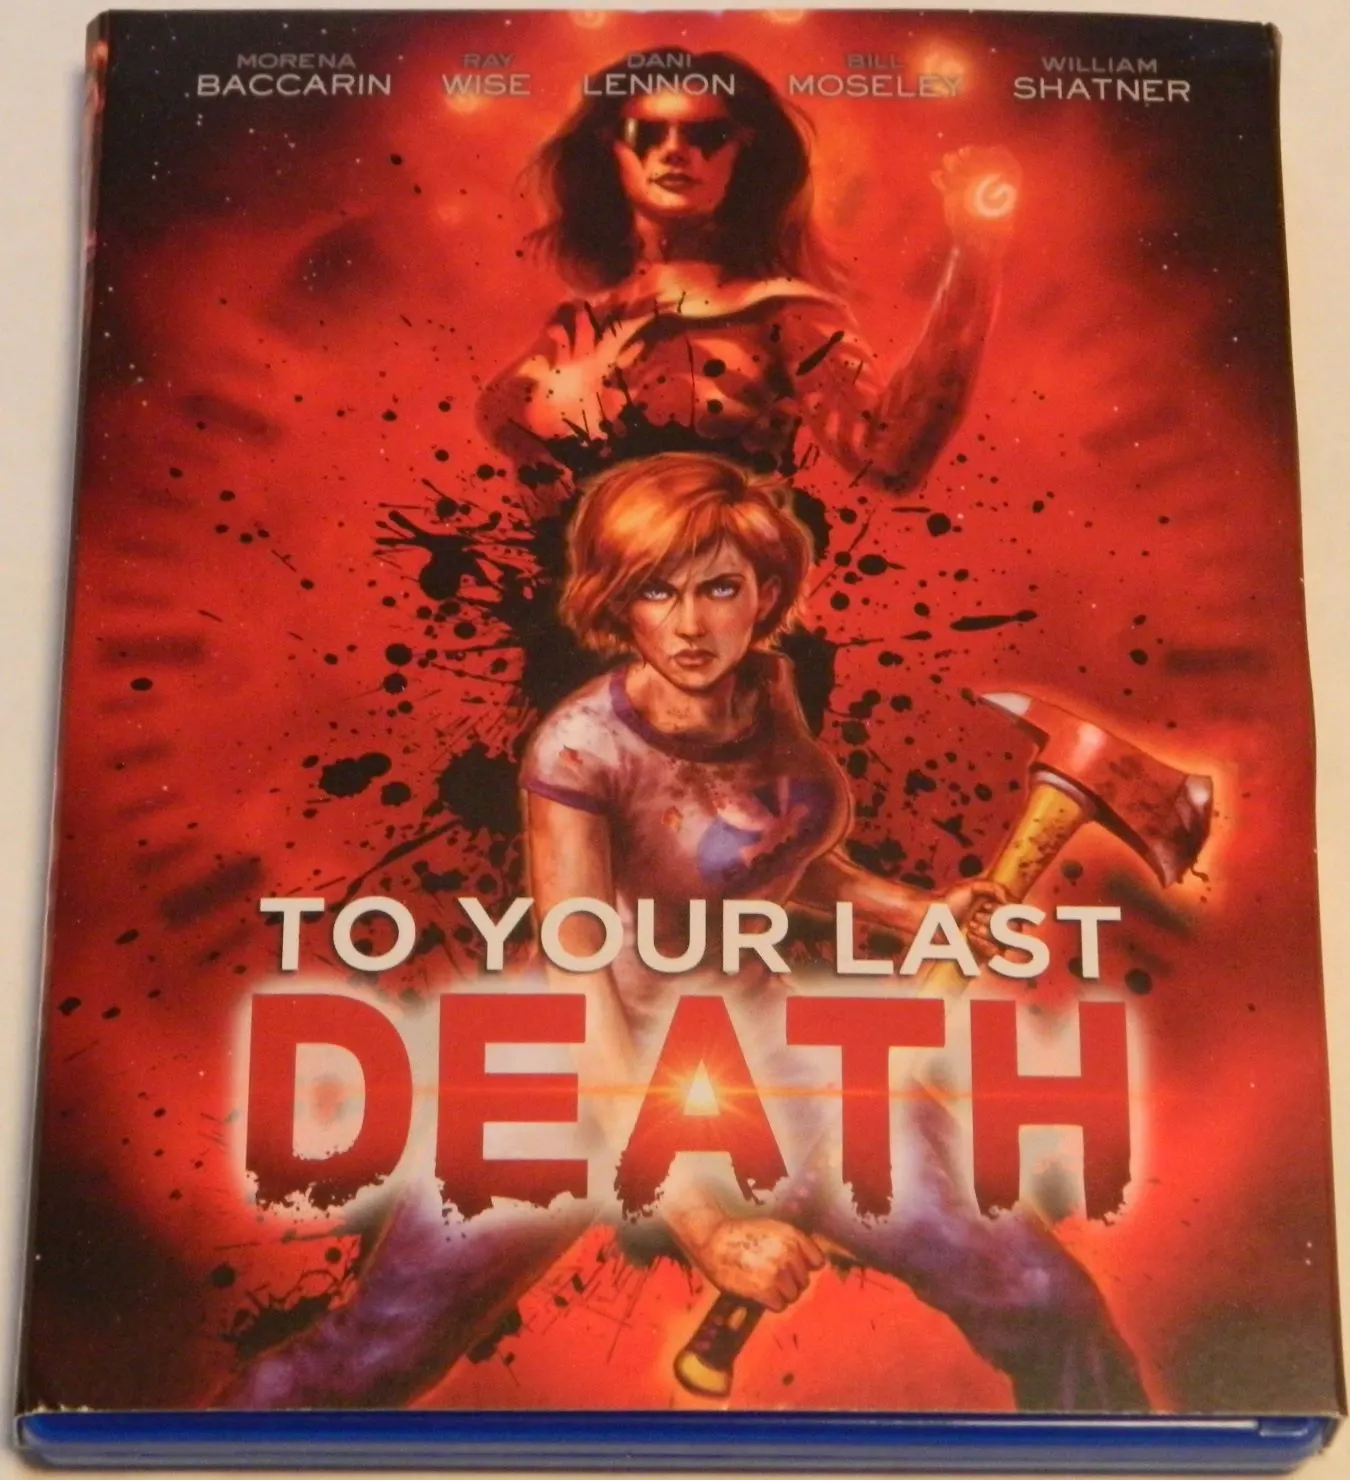 Blu-ray for To Your Last Death